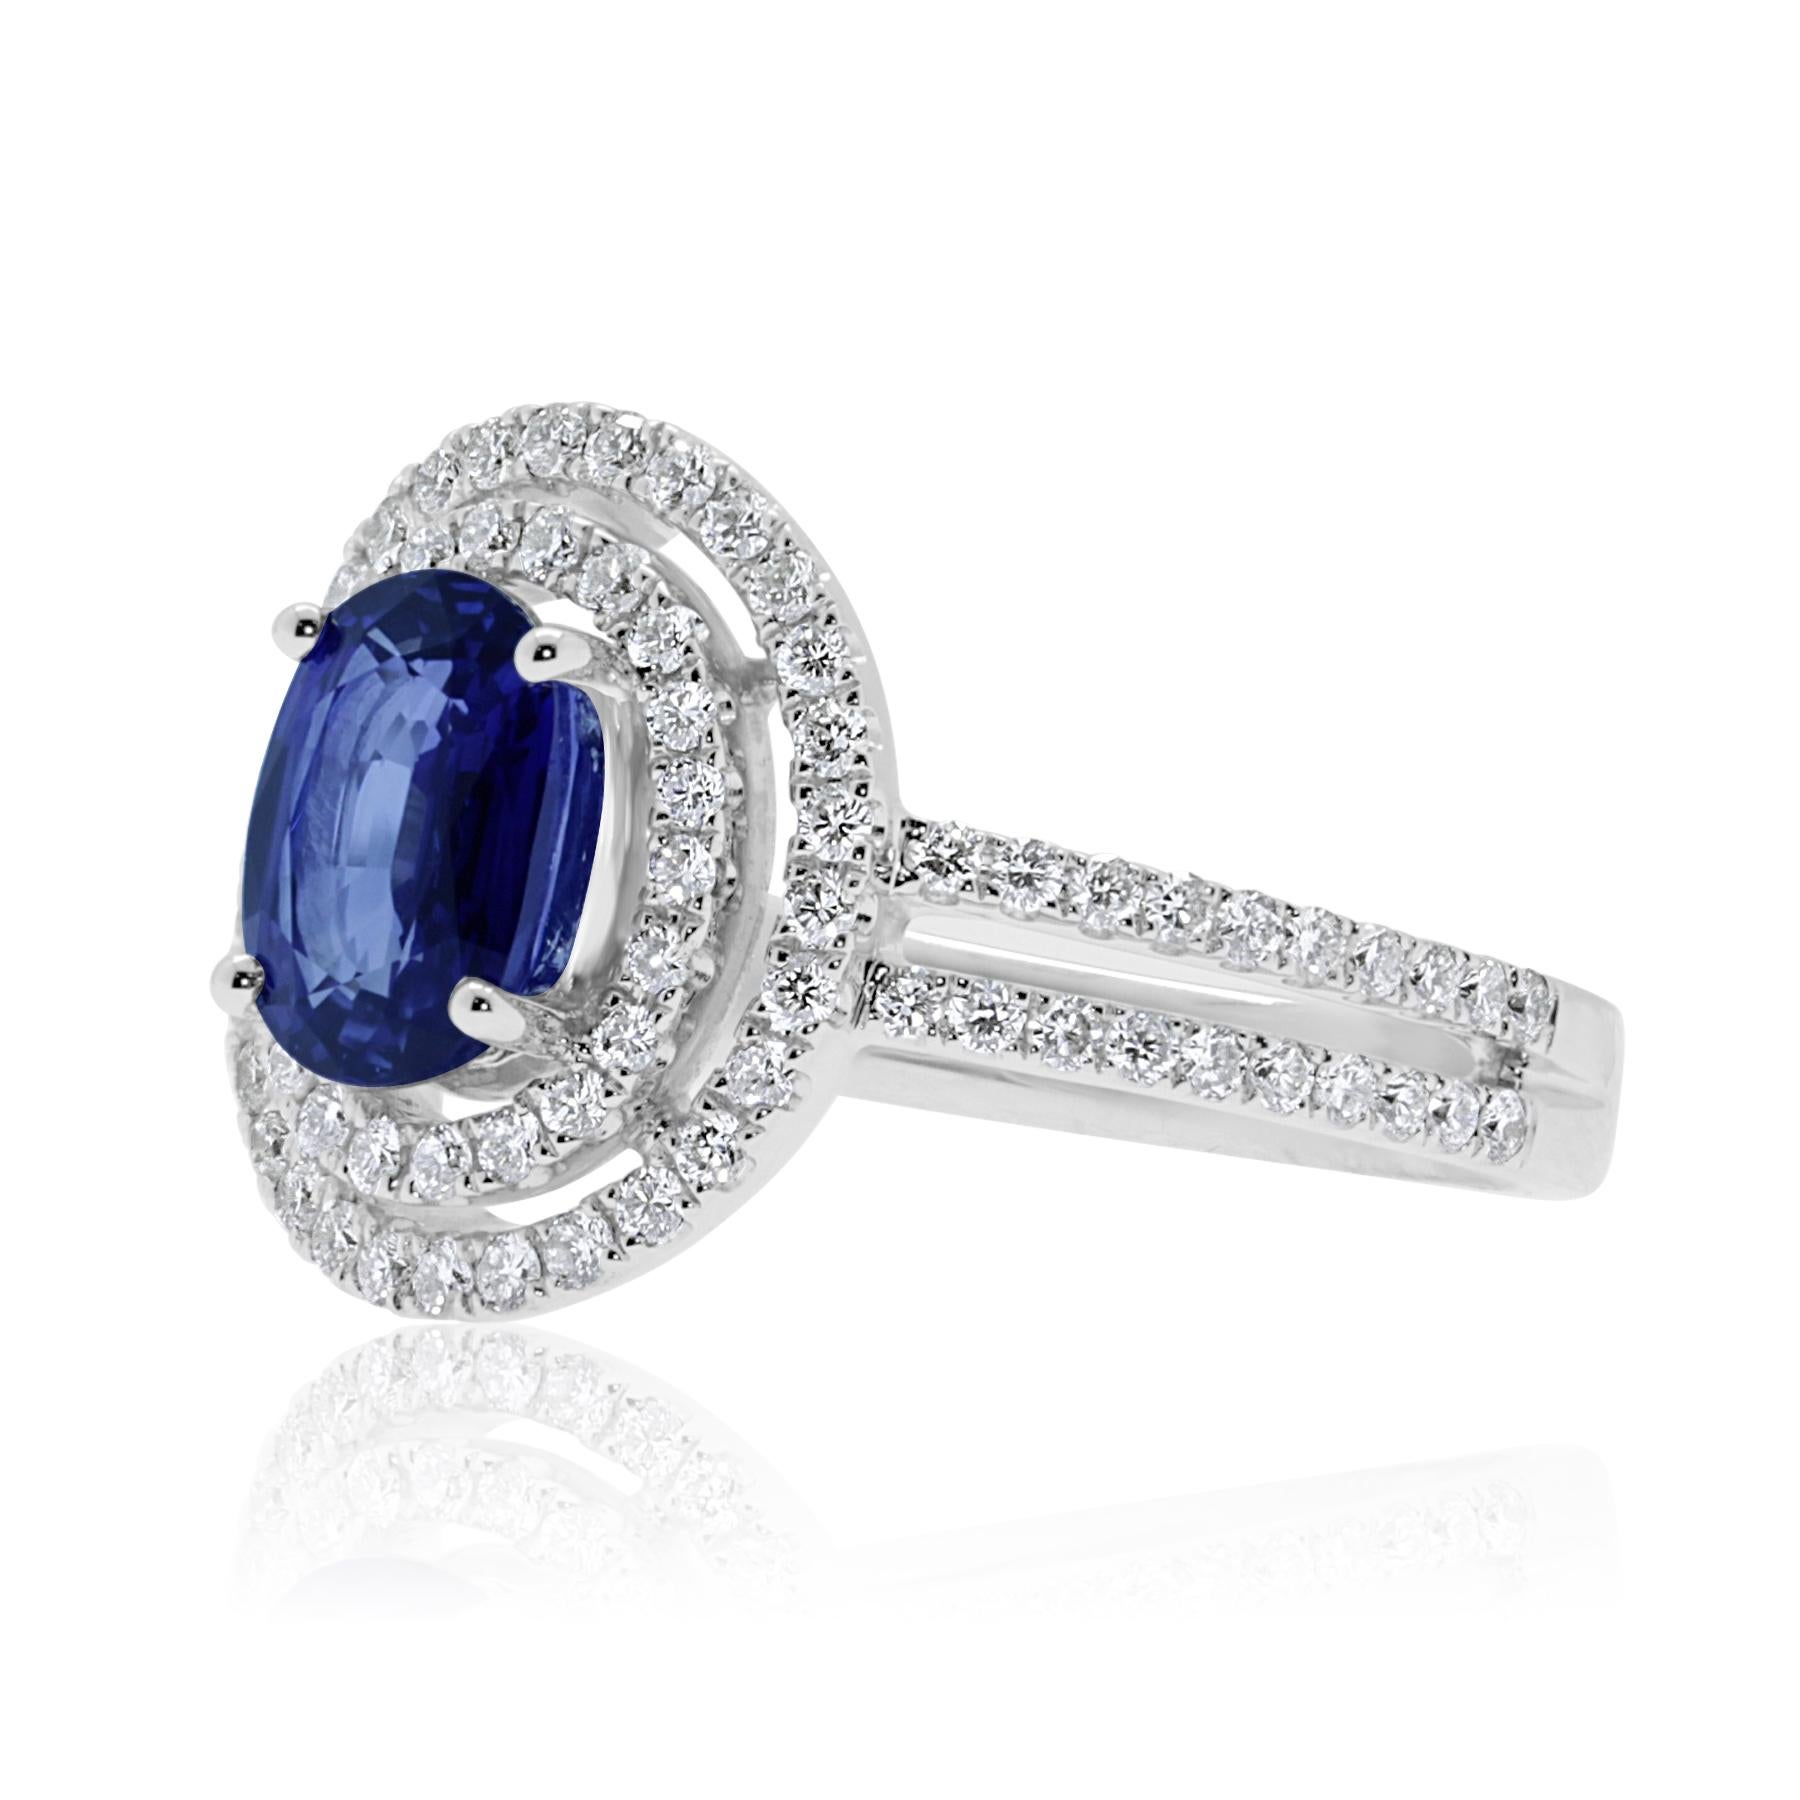 A great design for the modern and sophisticated bride to be.
oval shaped blue sapphire that matches perfectly with white diamonds.
the sapphire, weighs 1.71ct, is surrounded by a double row of white diamonds and has additional double row of white